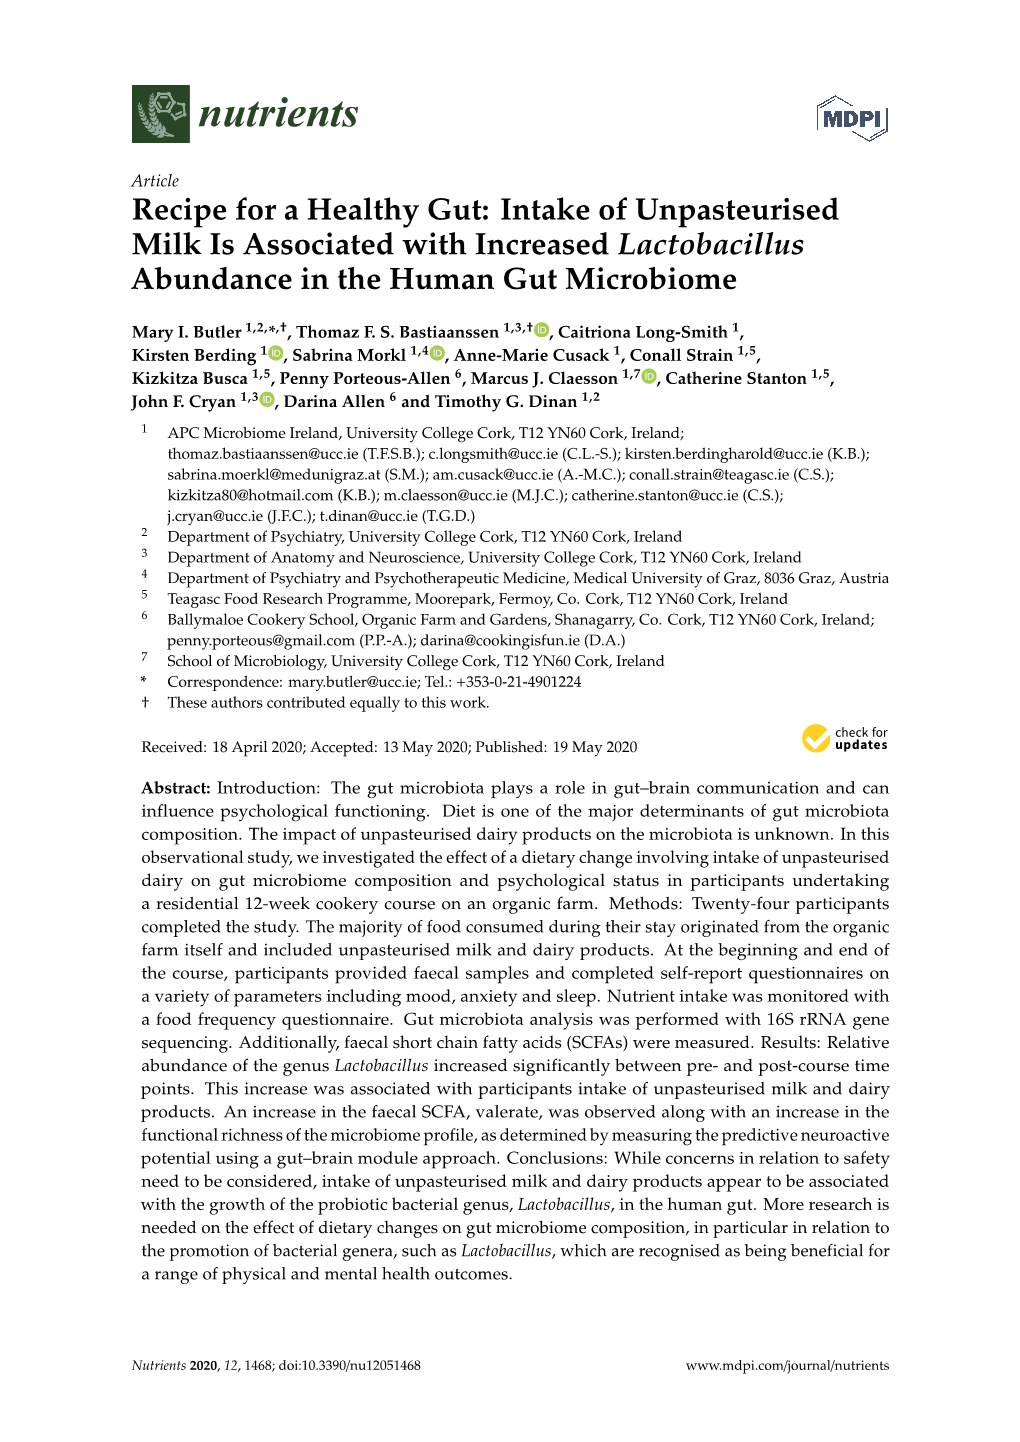 Recipe for a Healthy Gut: Intake of Unpasteurised Milk Is Associated with Increased Lactobacillus Abundance in the Human Gut Microbiome